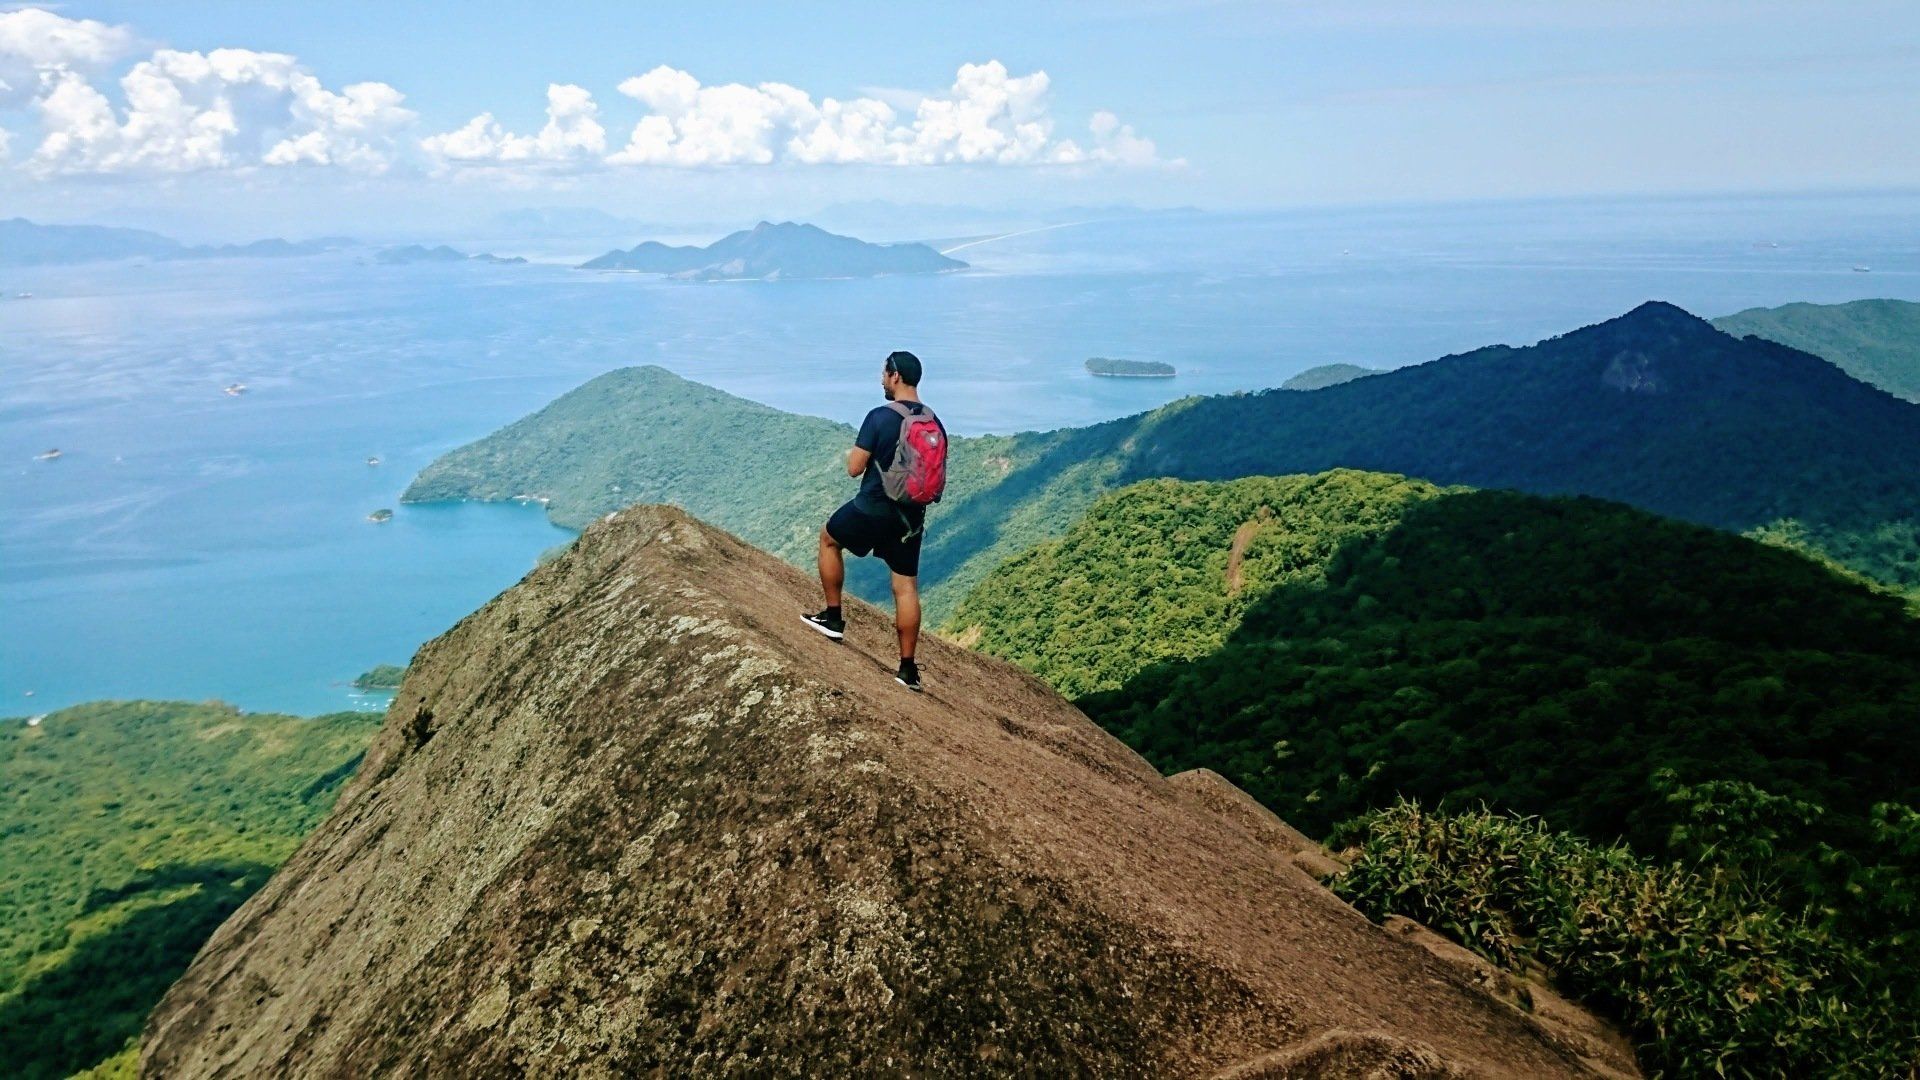 Pico do Papagaio - Ilha Grande, seen from above with an adventurer at the summit enjoying the view